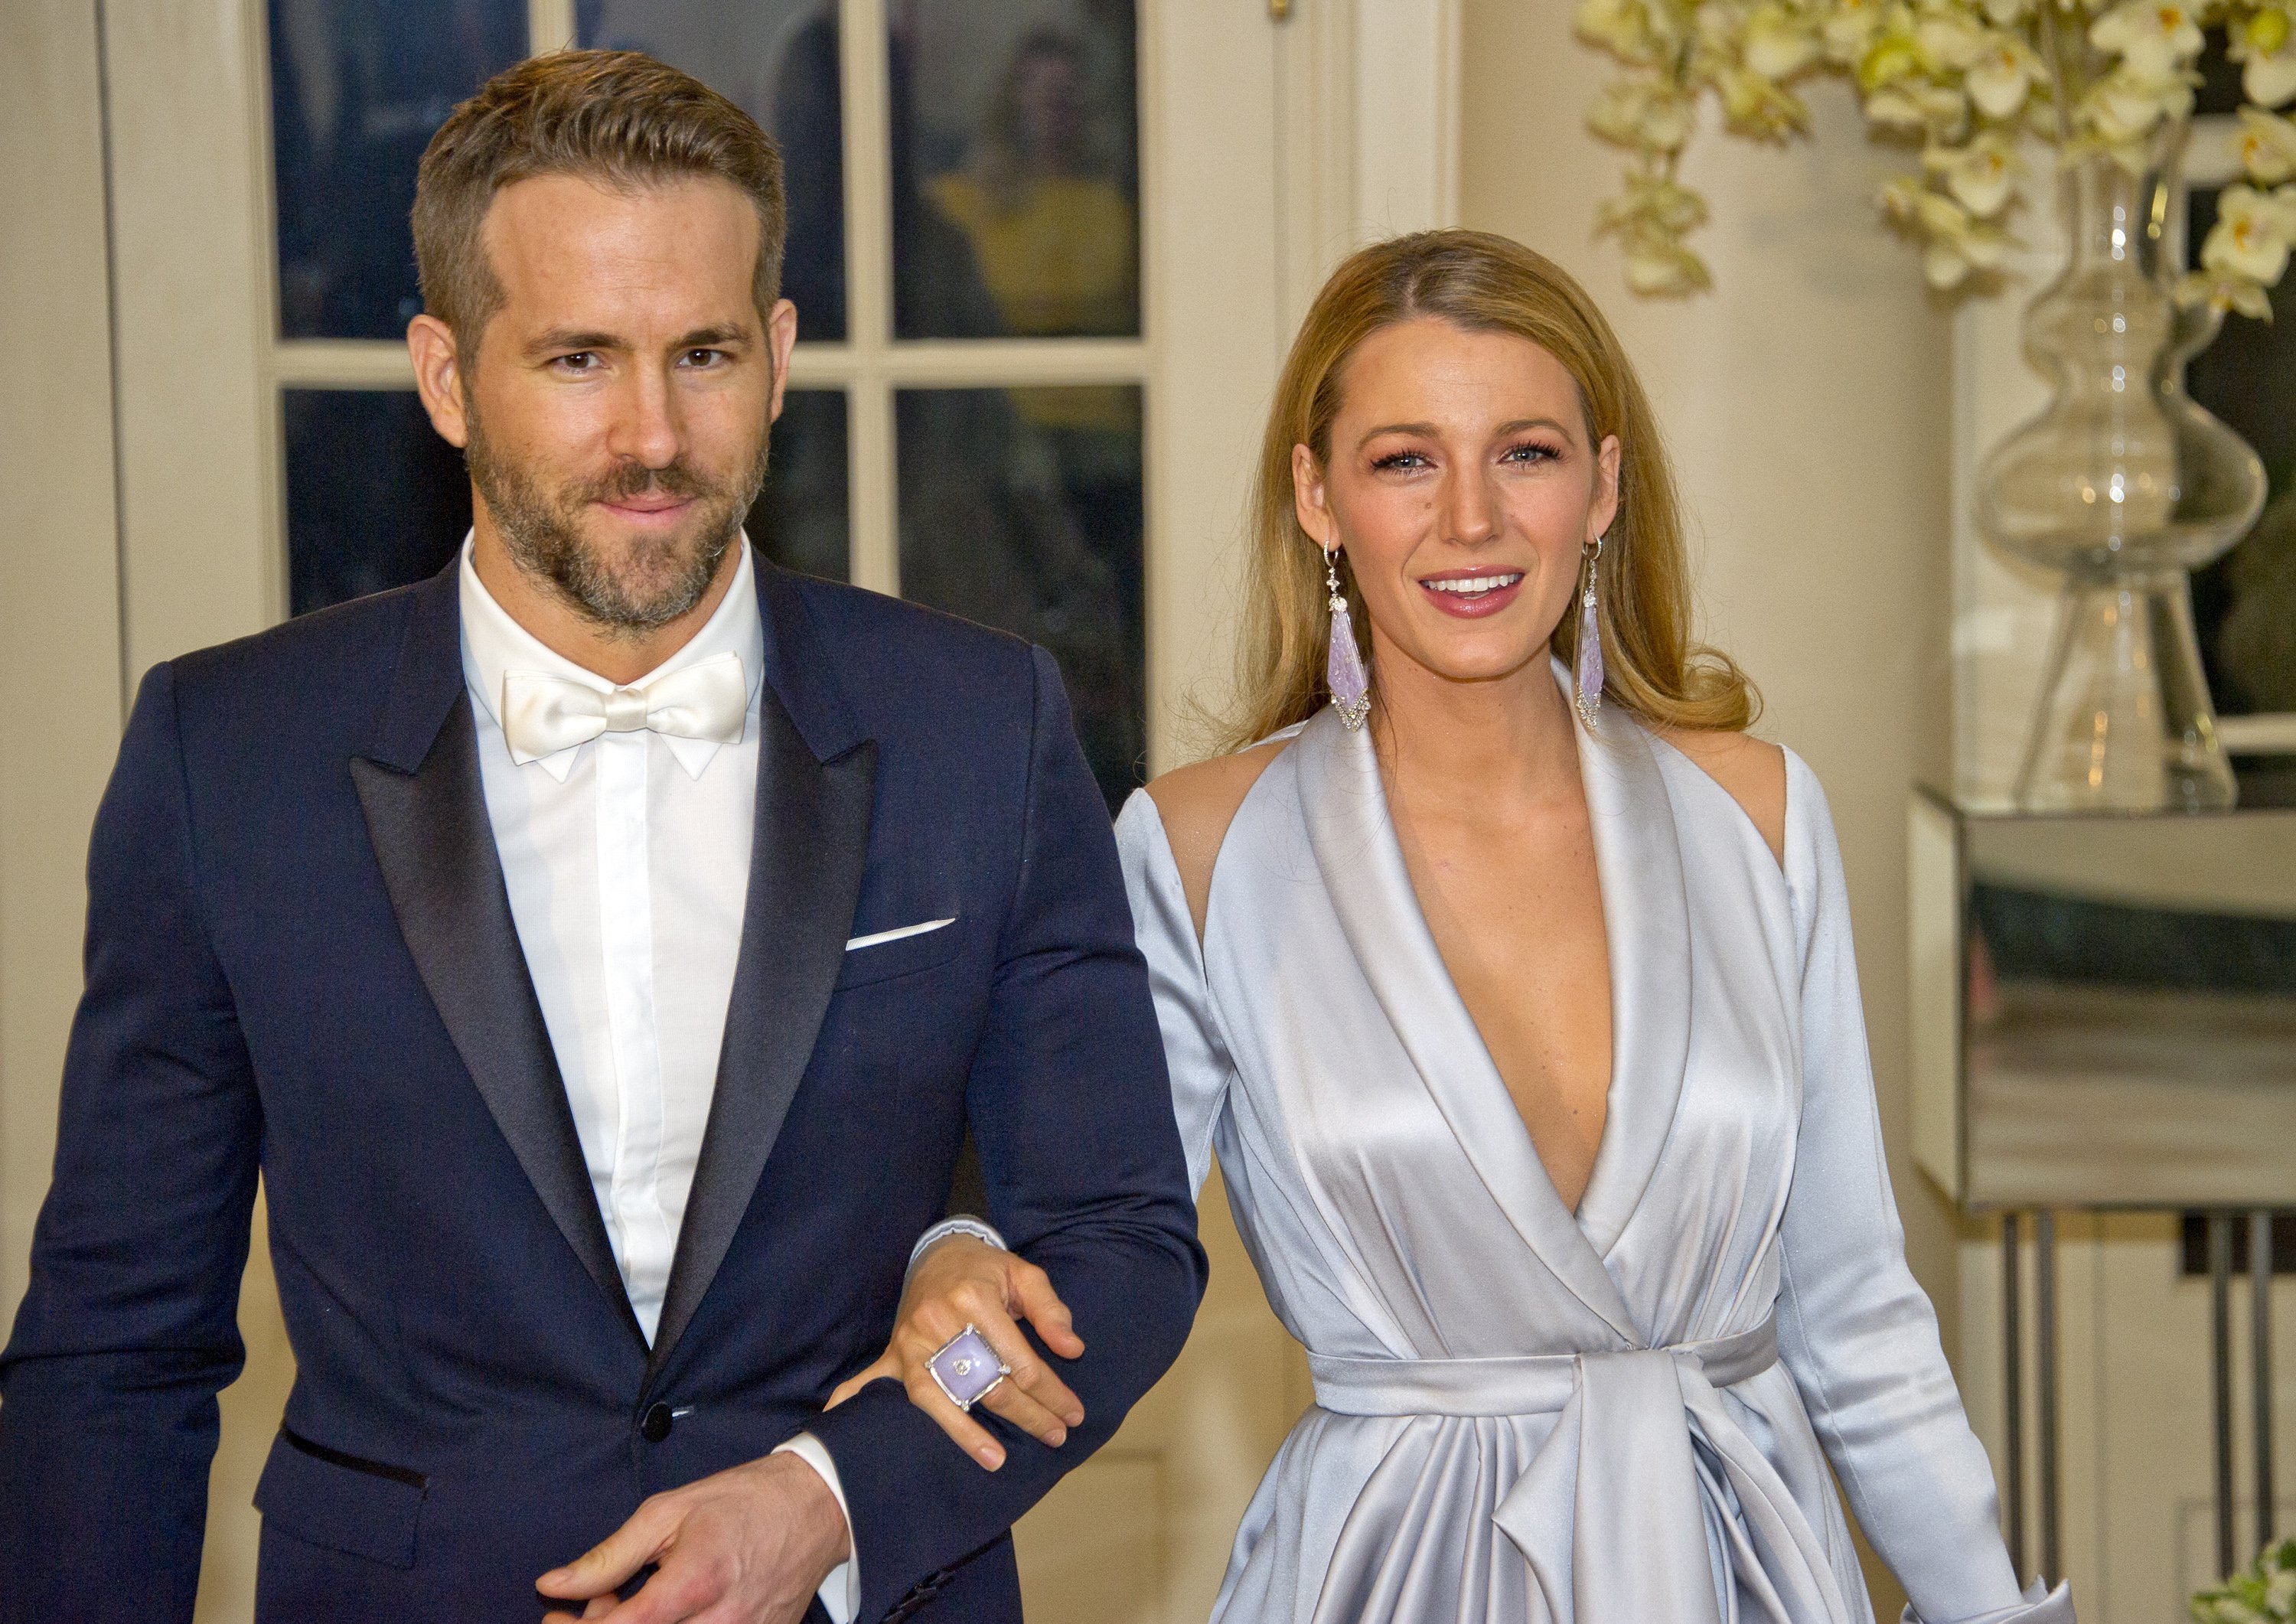 Ryan Reynolds and Blake Lively arrive for the State Dinner in honor of Prime Minister Trudeau and Mrs. Sophie Trudeau of Canada at the White House March 10, 2016. | Photo: GettyImages